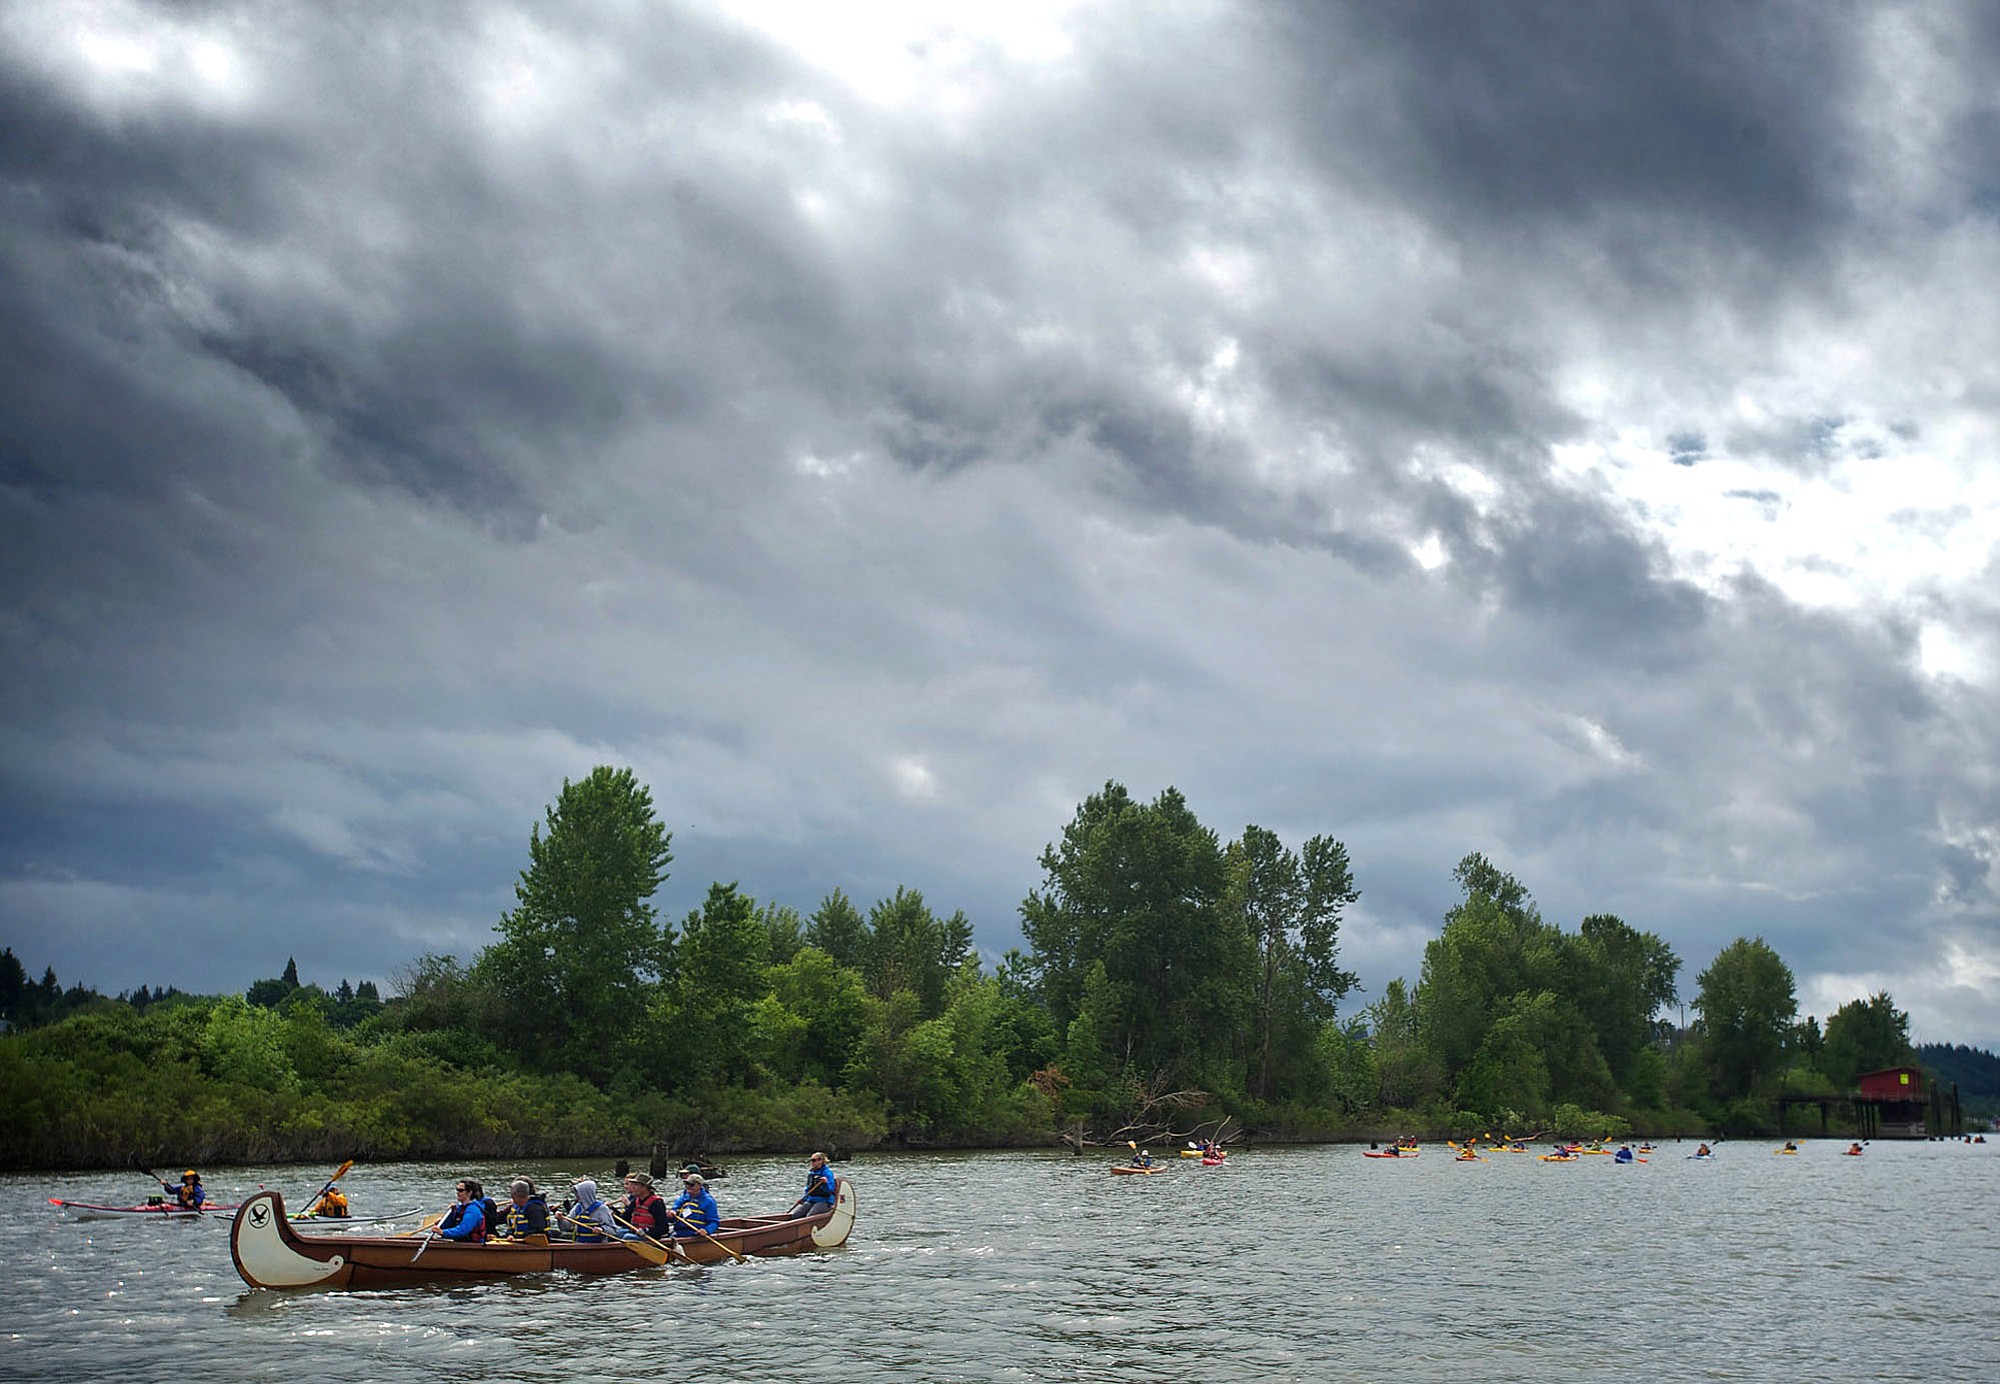 Dignitaries and members of the public paddle down Lake River to the Columbia River in 2012 during the Big Paddle event, which allowed them to learn about historical, cultural and environmental sites along the way.